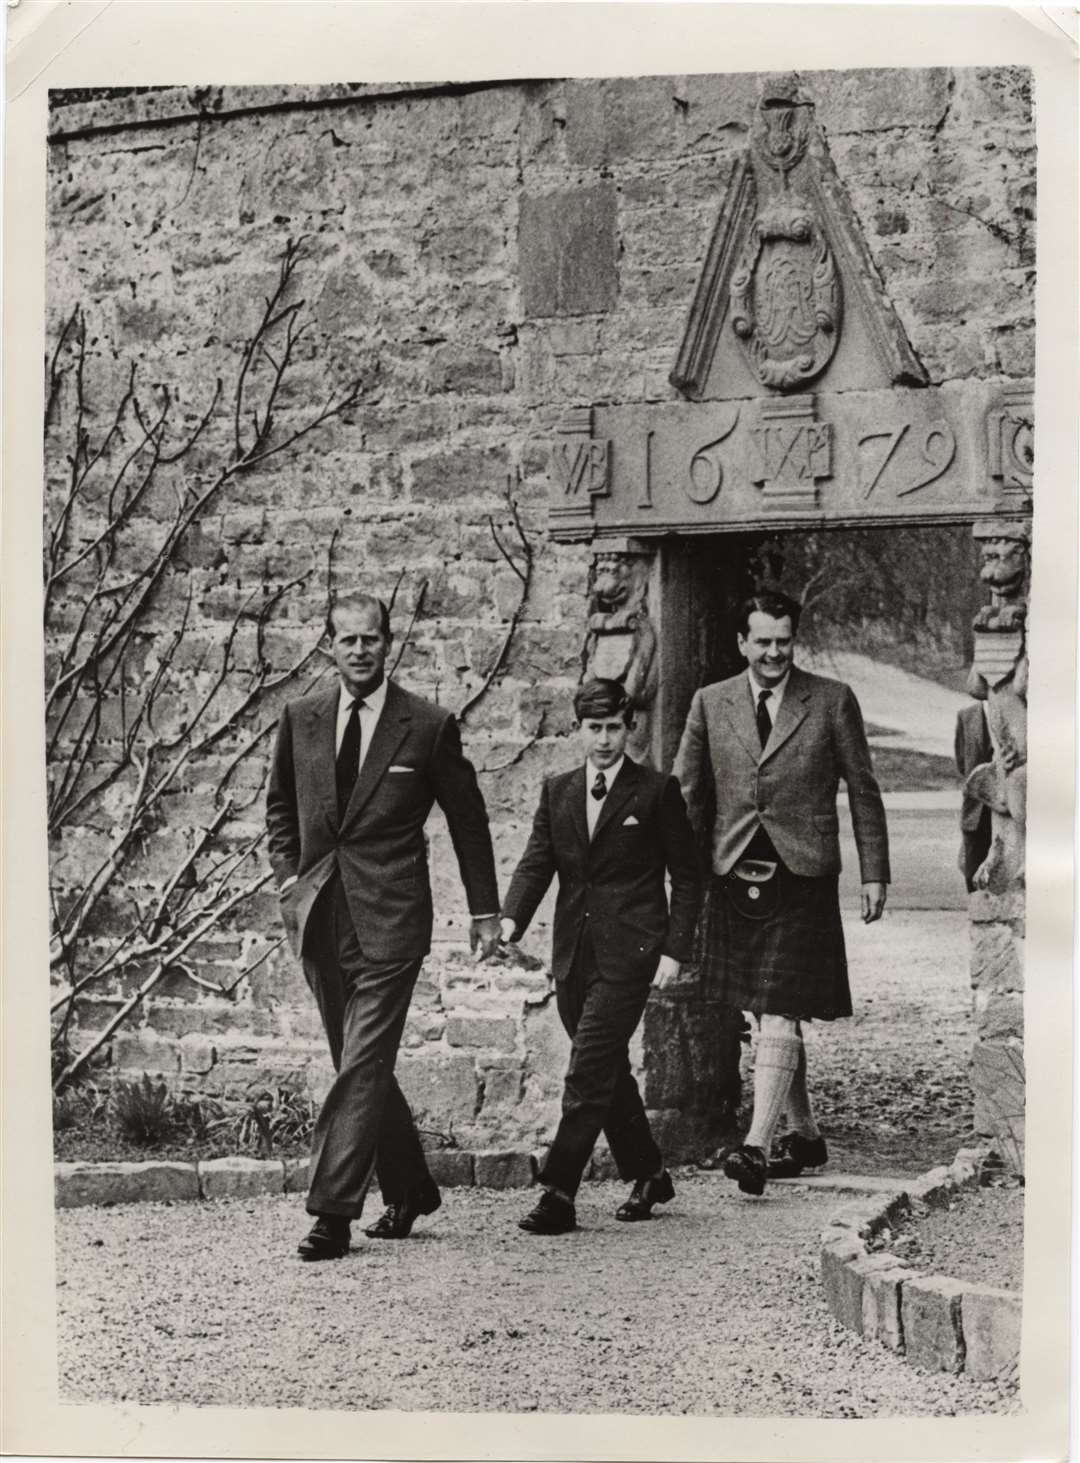 A young Prince Charles and his father the Duke of Edinburgh arriving at Gordonstoun, accompanied by friend Iain Tennant.